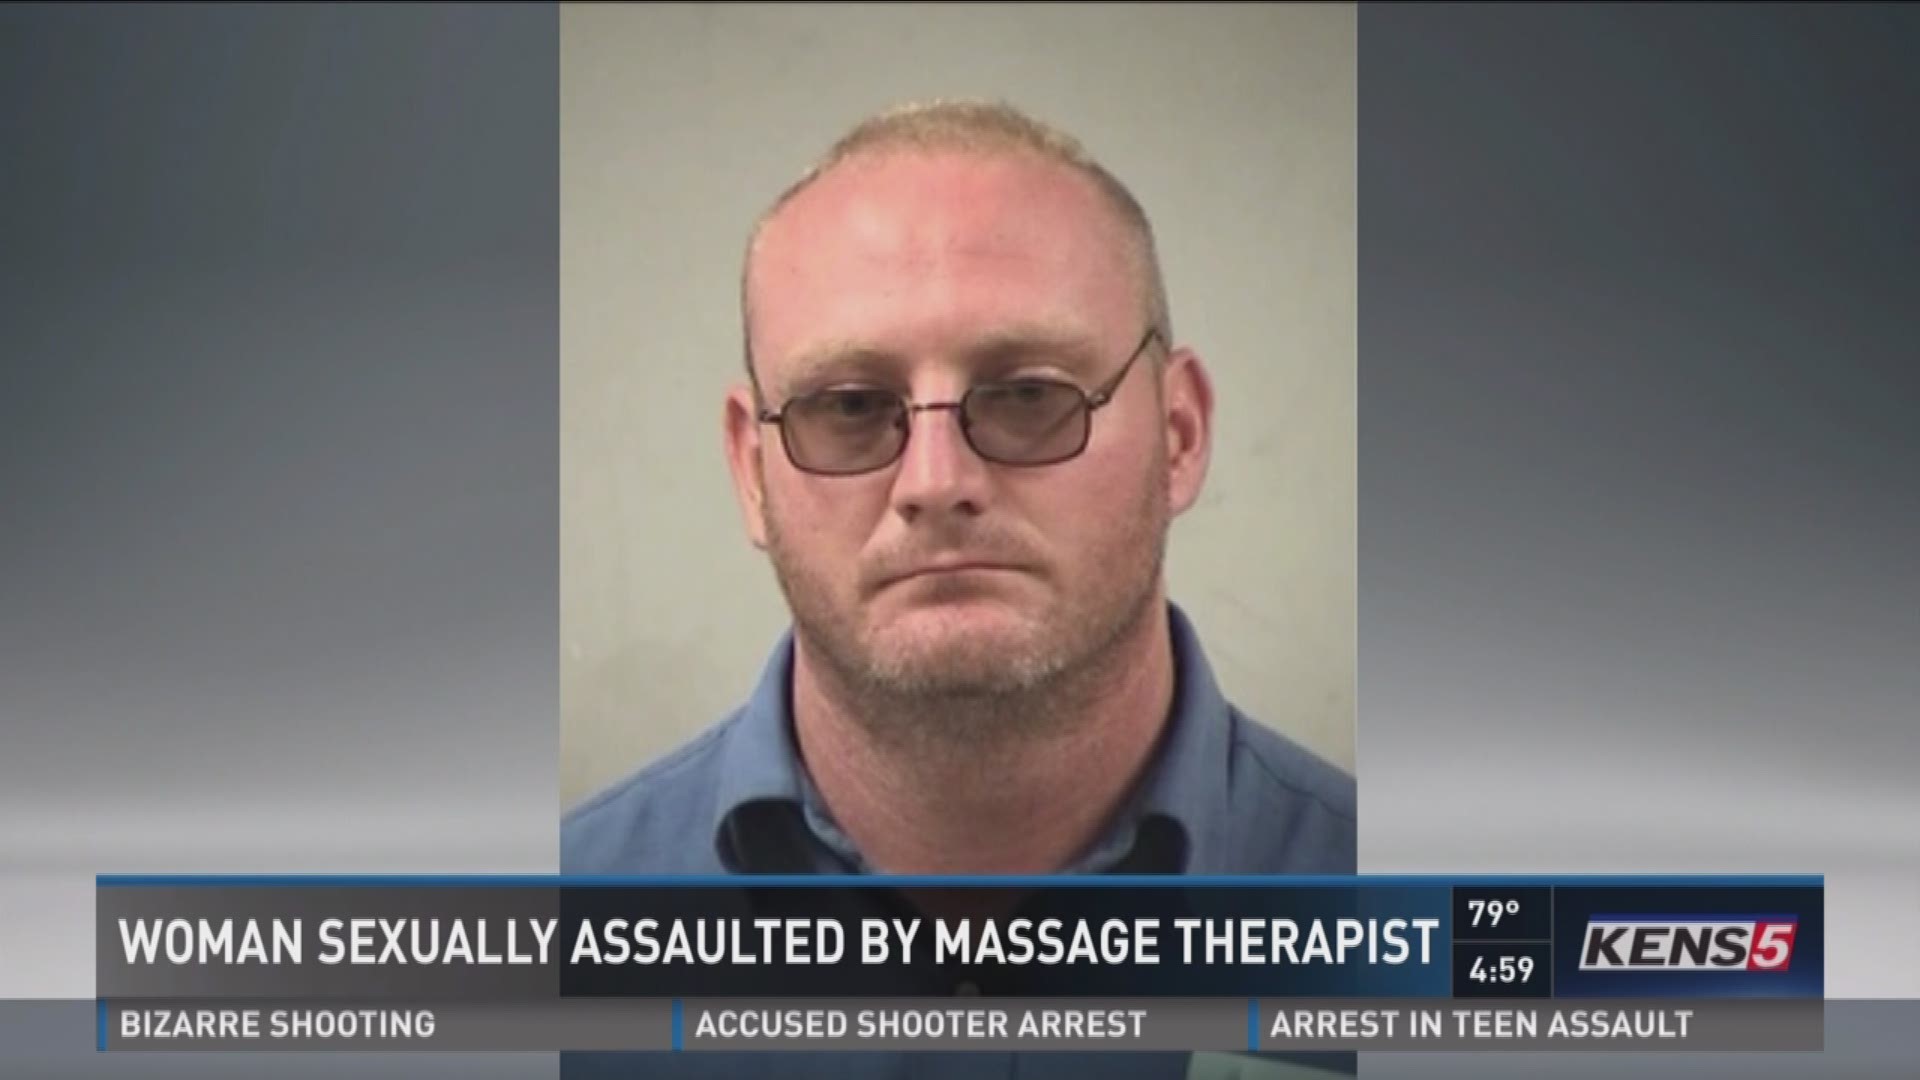 Woman sexually assaulted by massage therapist